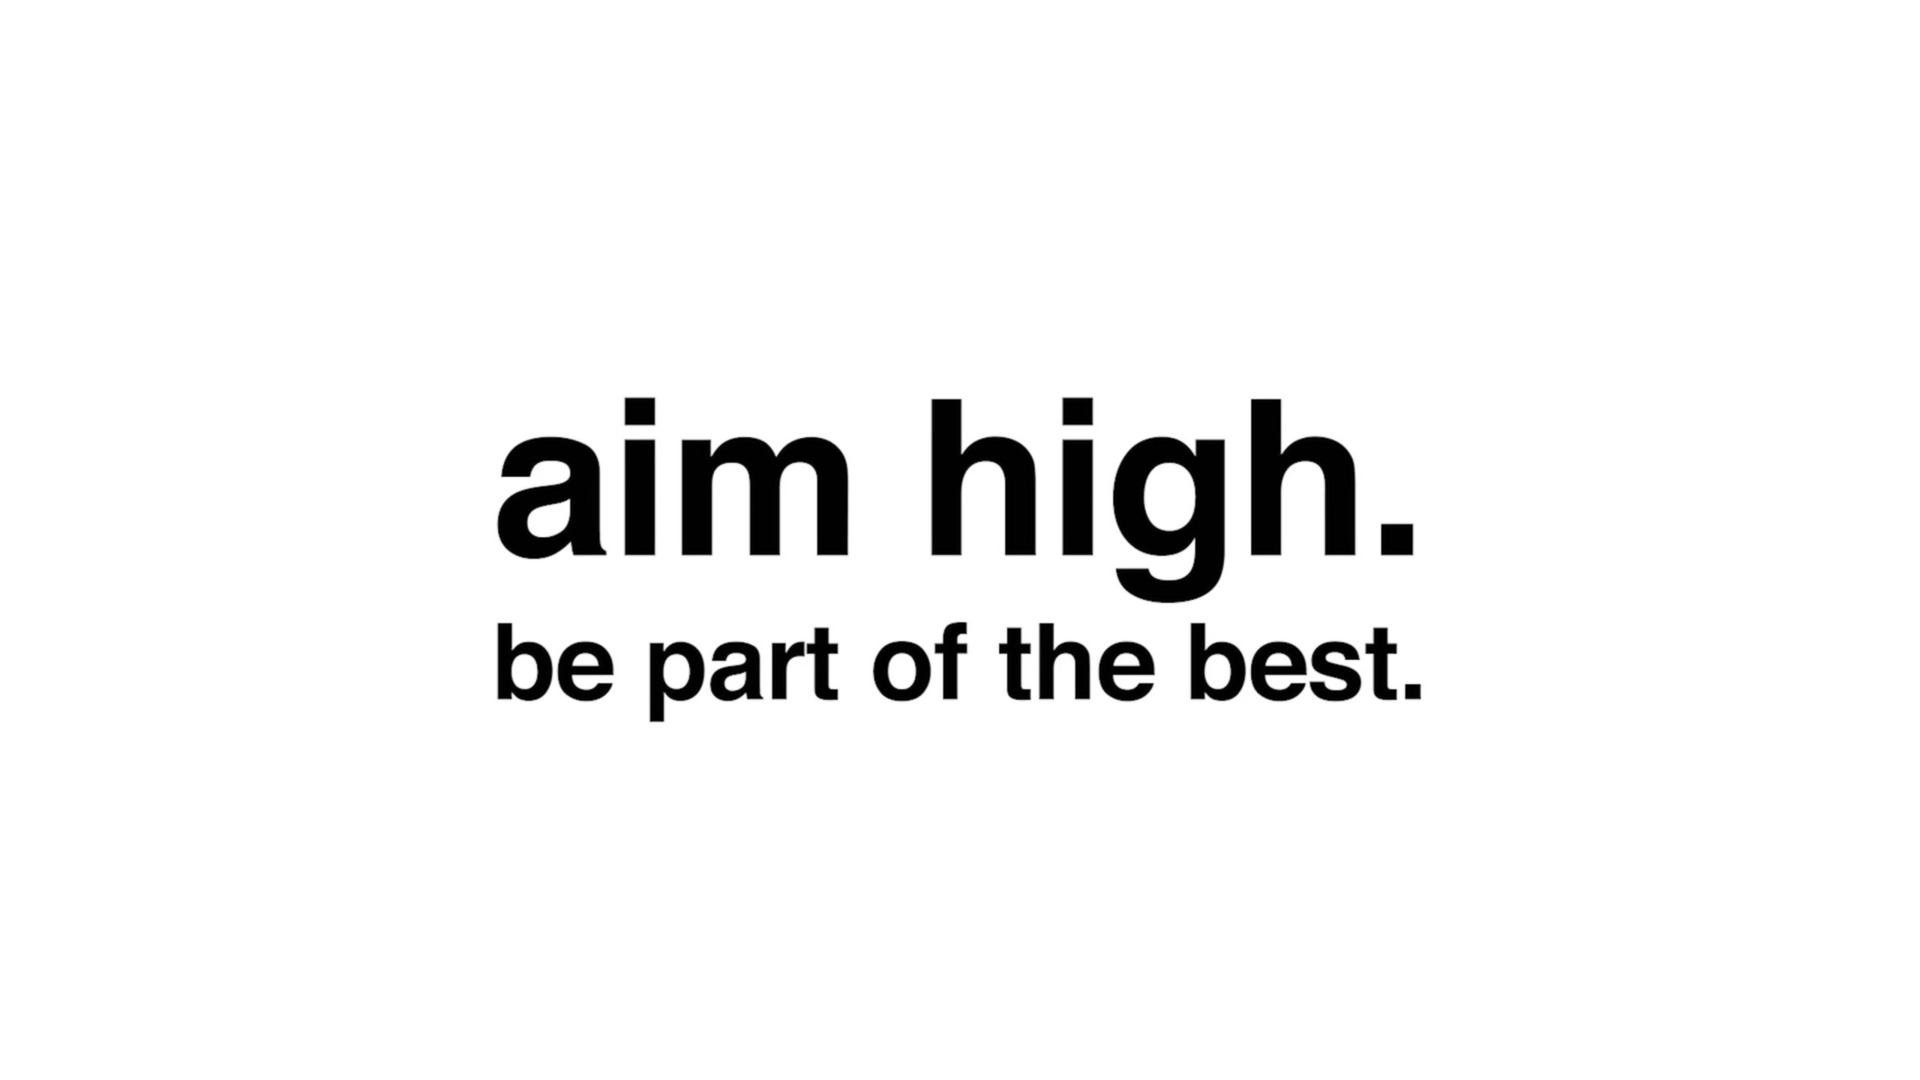 aim high. be part of the best.